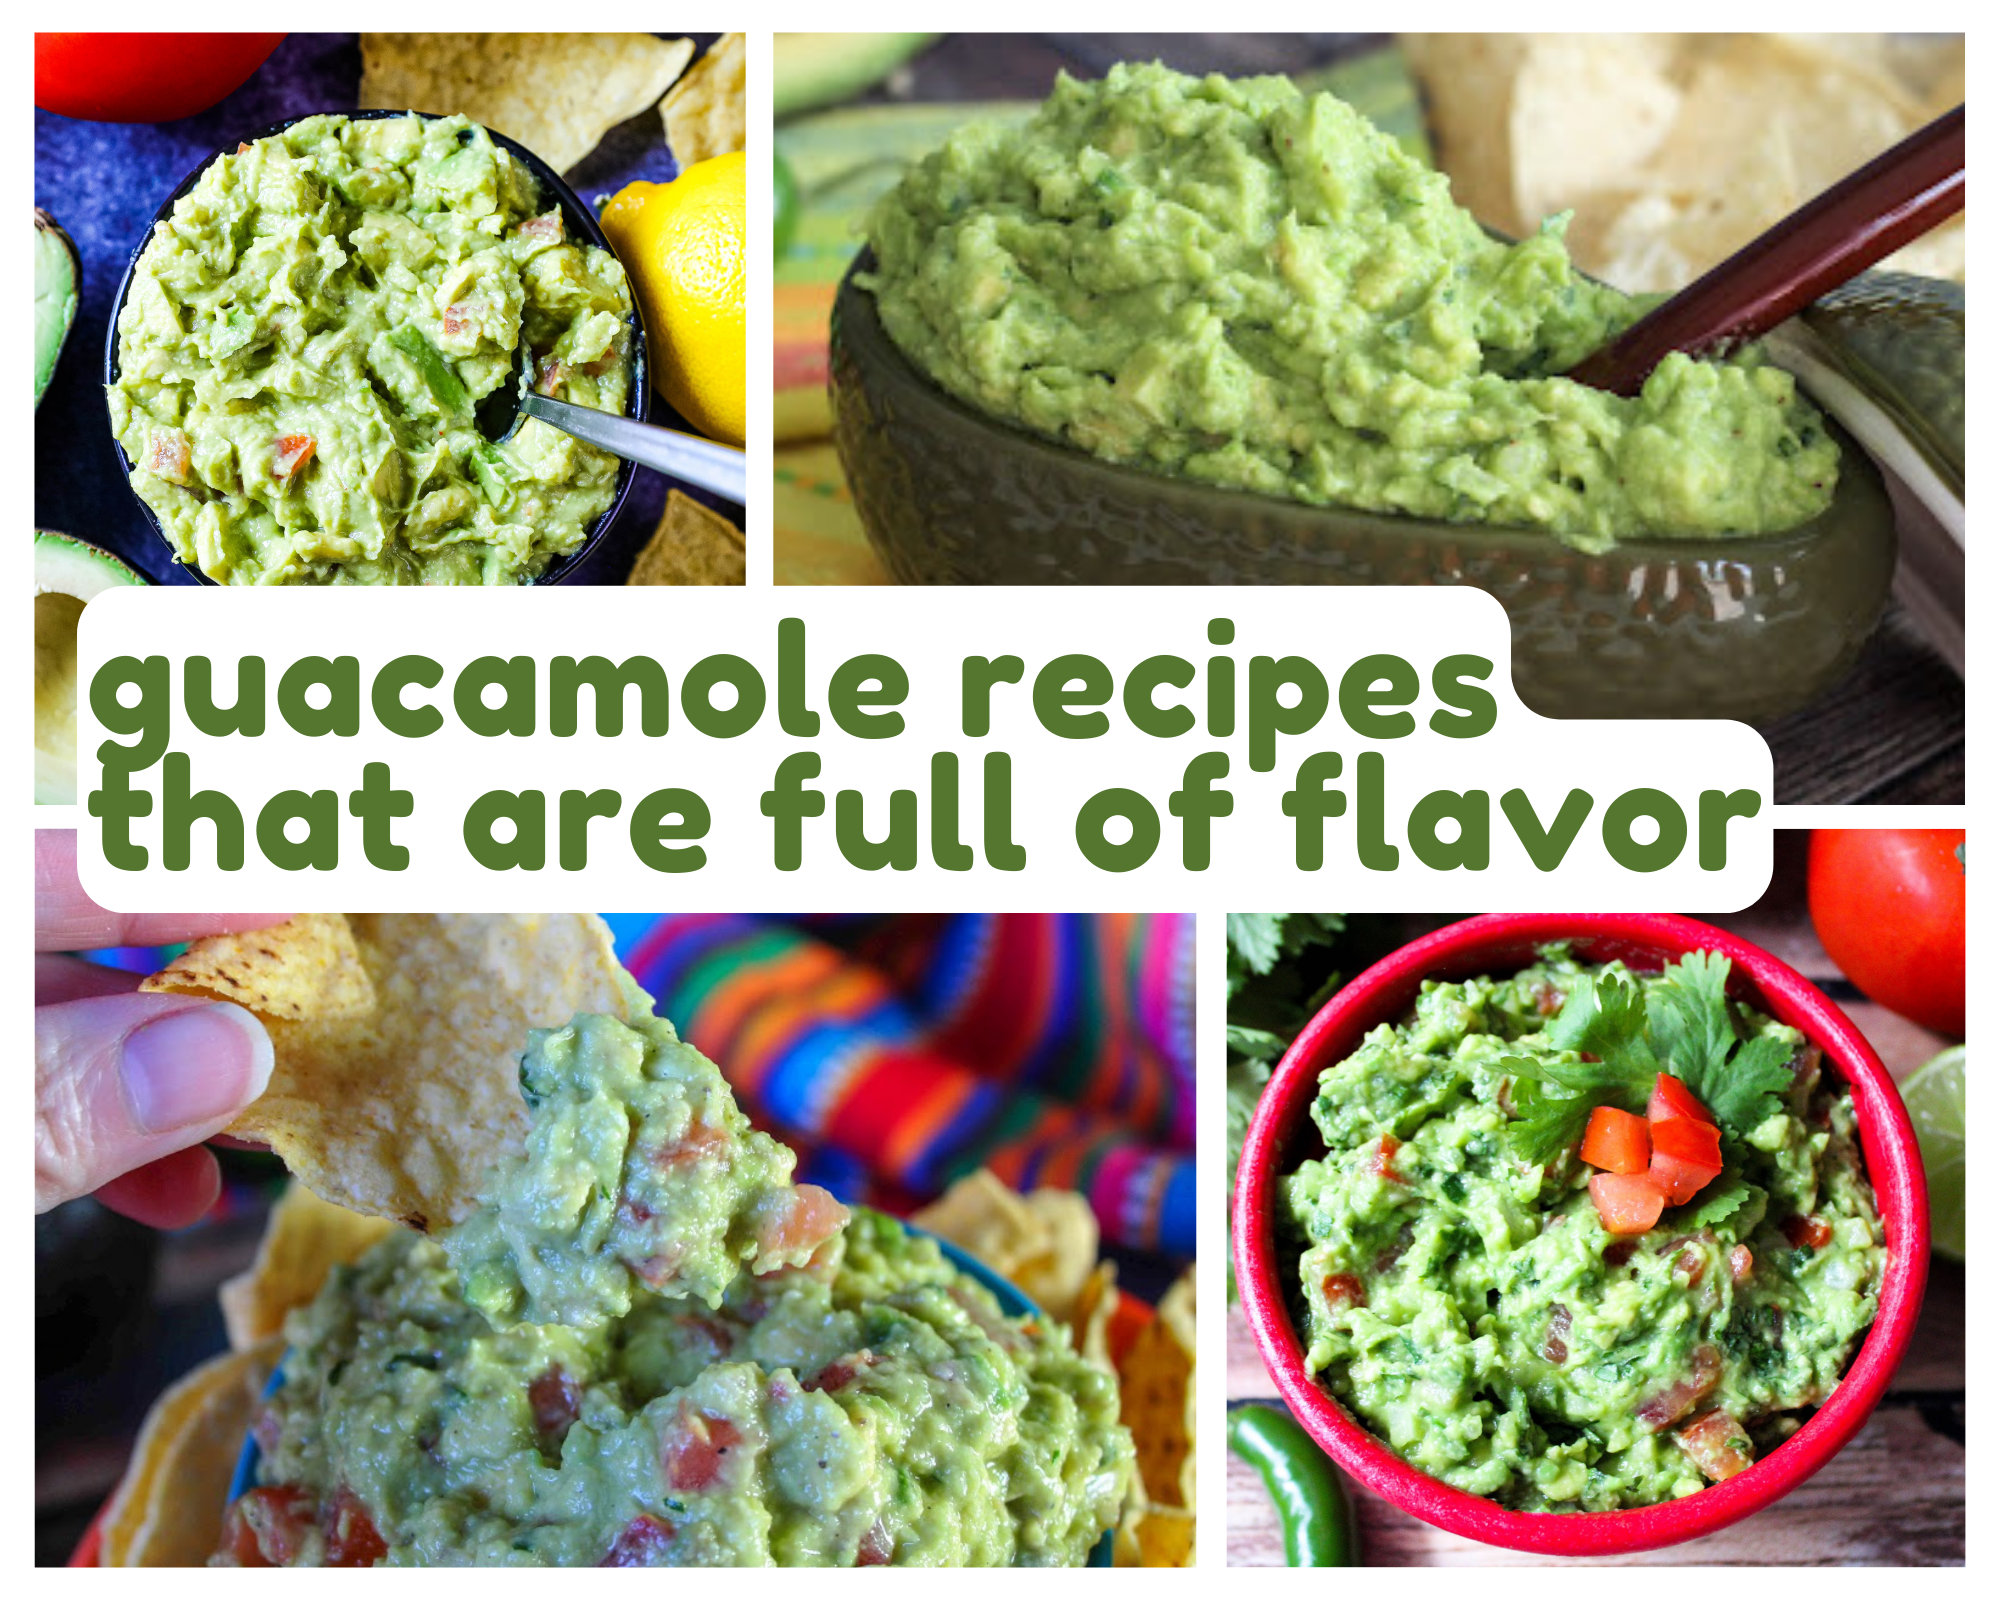 Guacamole Recipes that are Full of Flavor